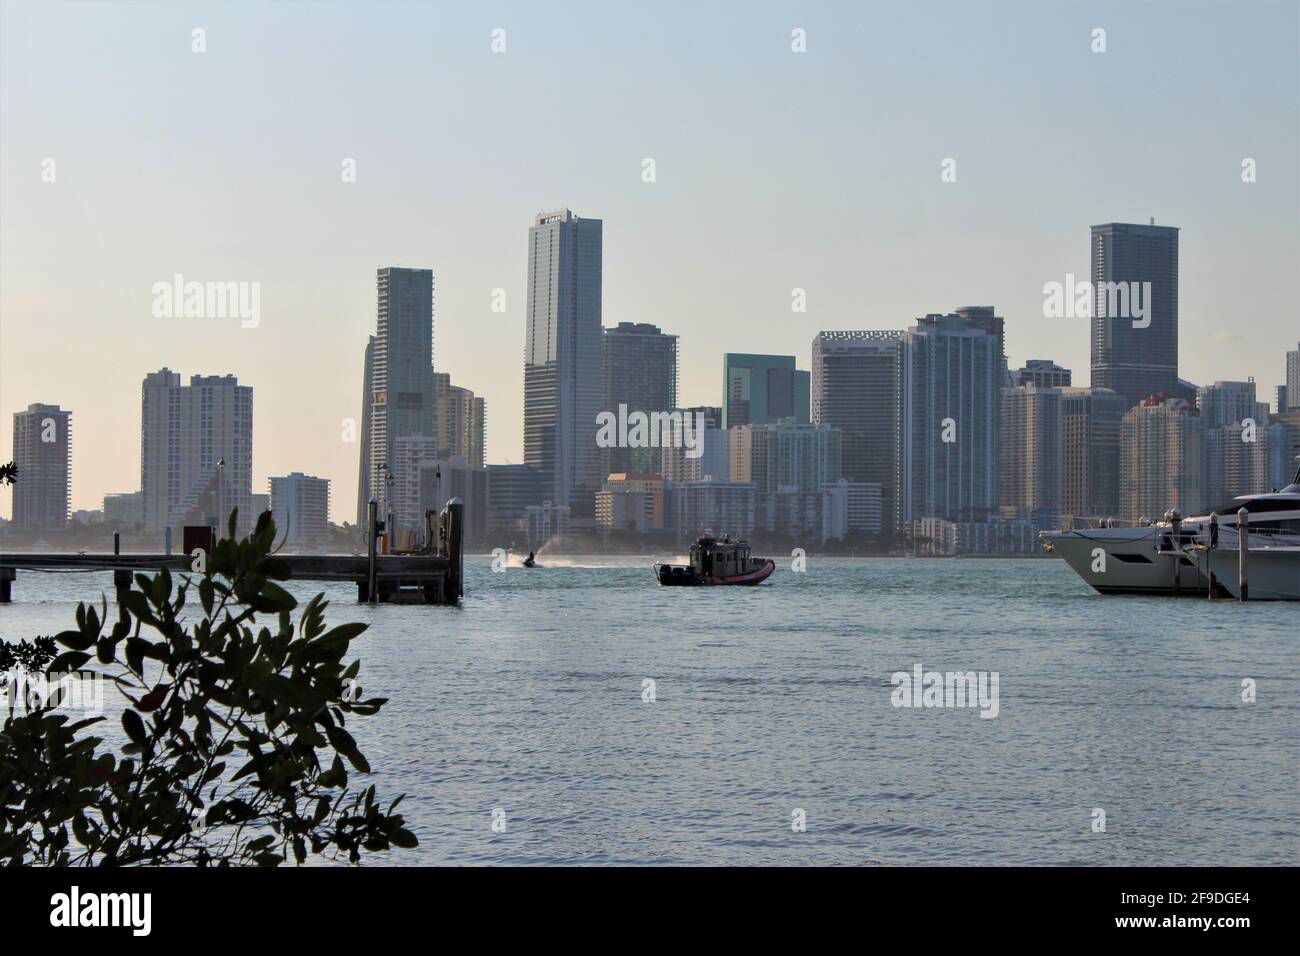 Tug boat going to save a yacht from the ocean in the Biscayne bay harbor inlet during sunset. Downtown Miami cityscape in the background. Stock Photo